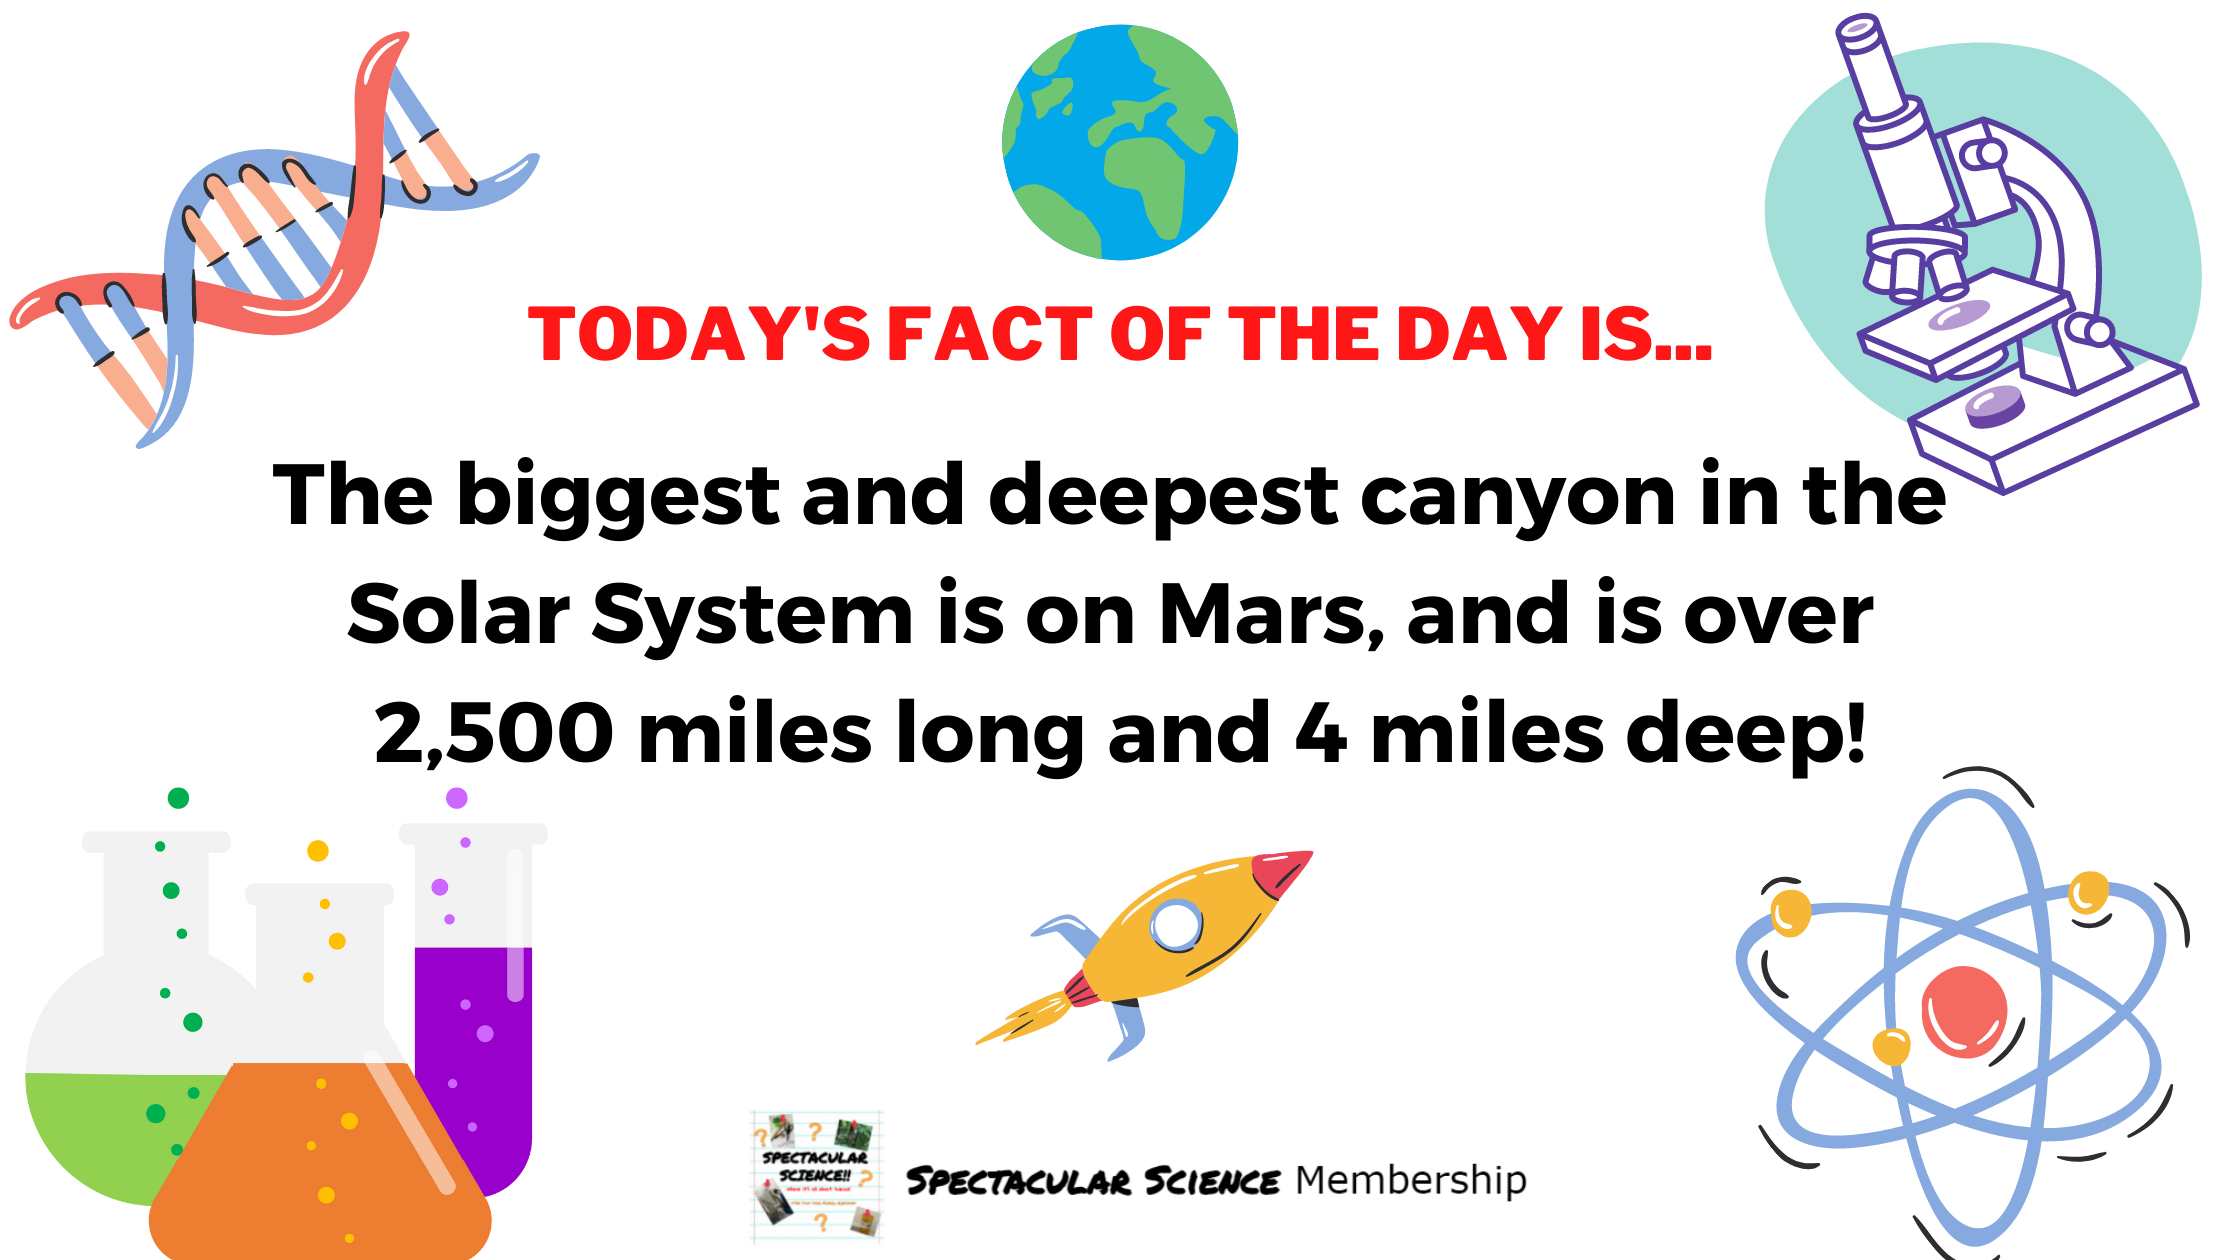 Fact of the Day Image Dec. 29th